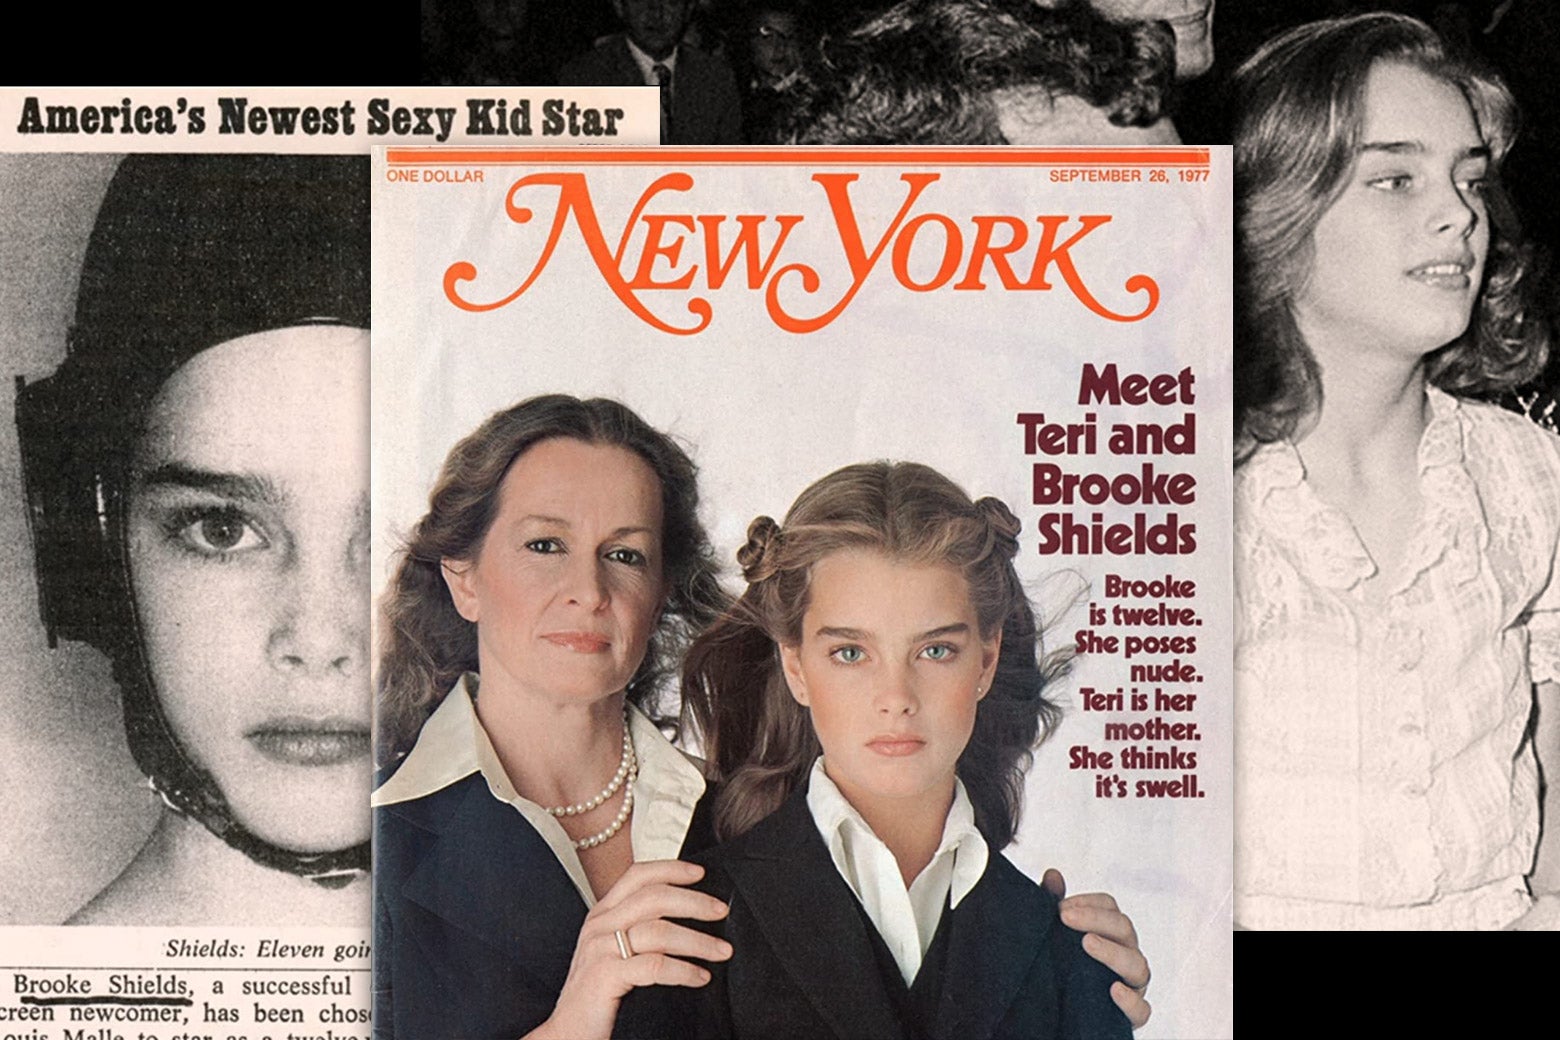 Old magazine covers and articles featuring Brooke Shields as a child star. 